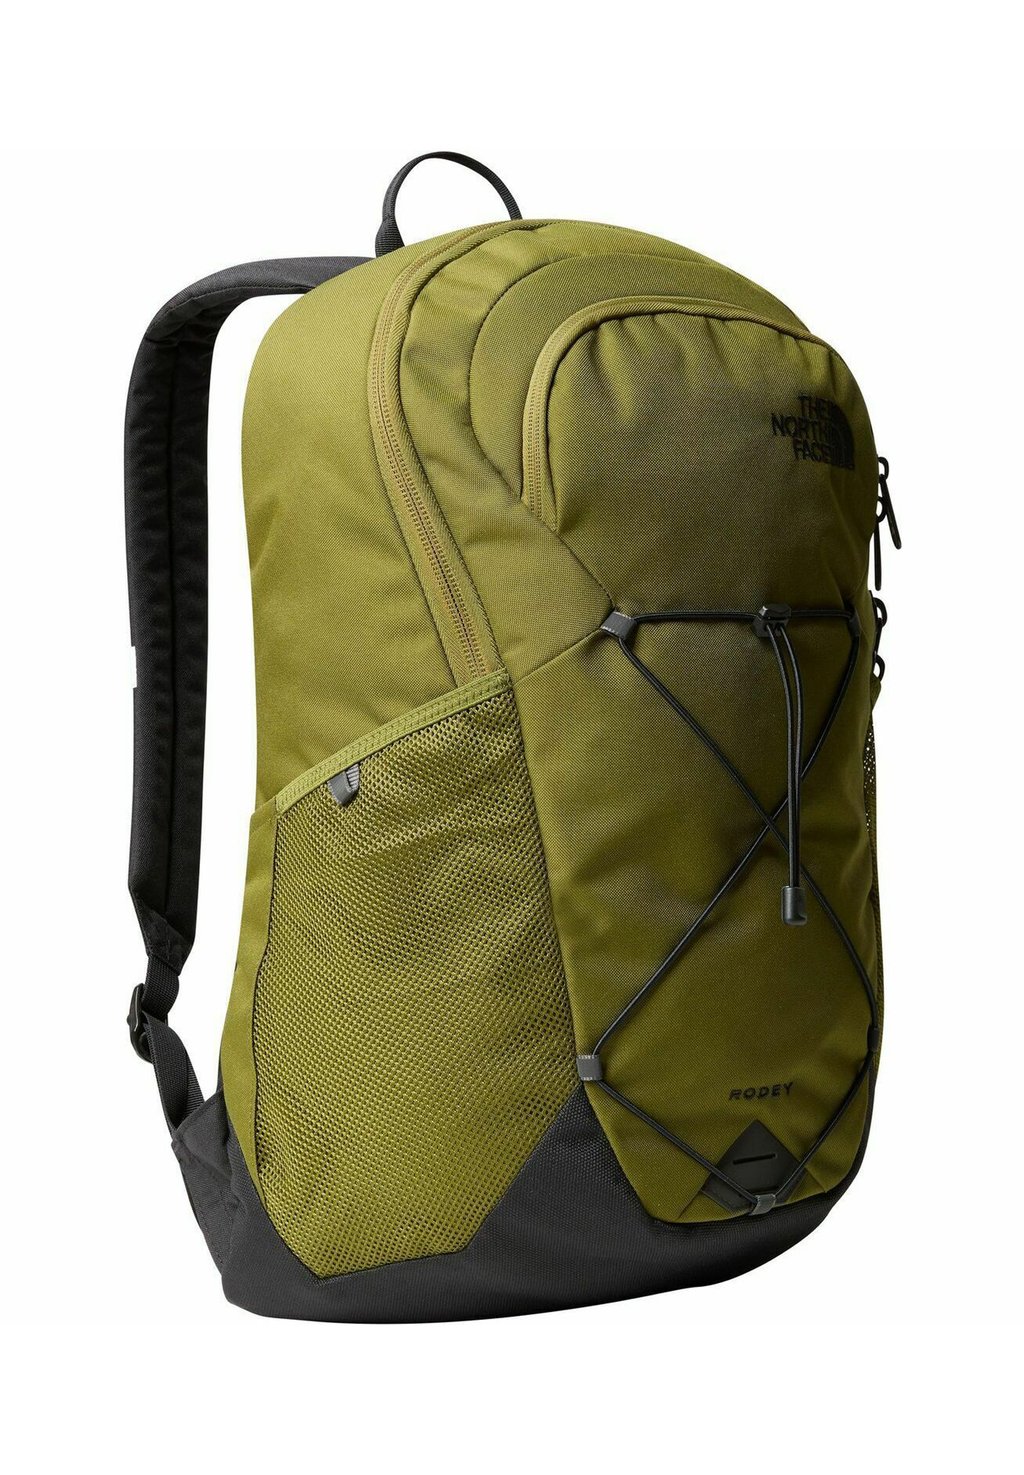 Рюкзак LAPTOPFACH The North Face, цвет forest olive-new taupe